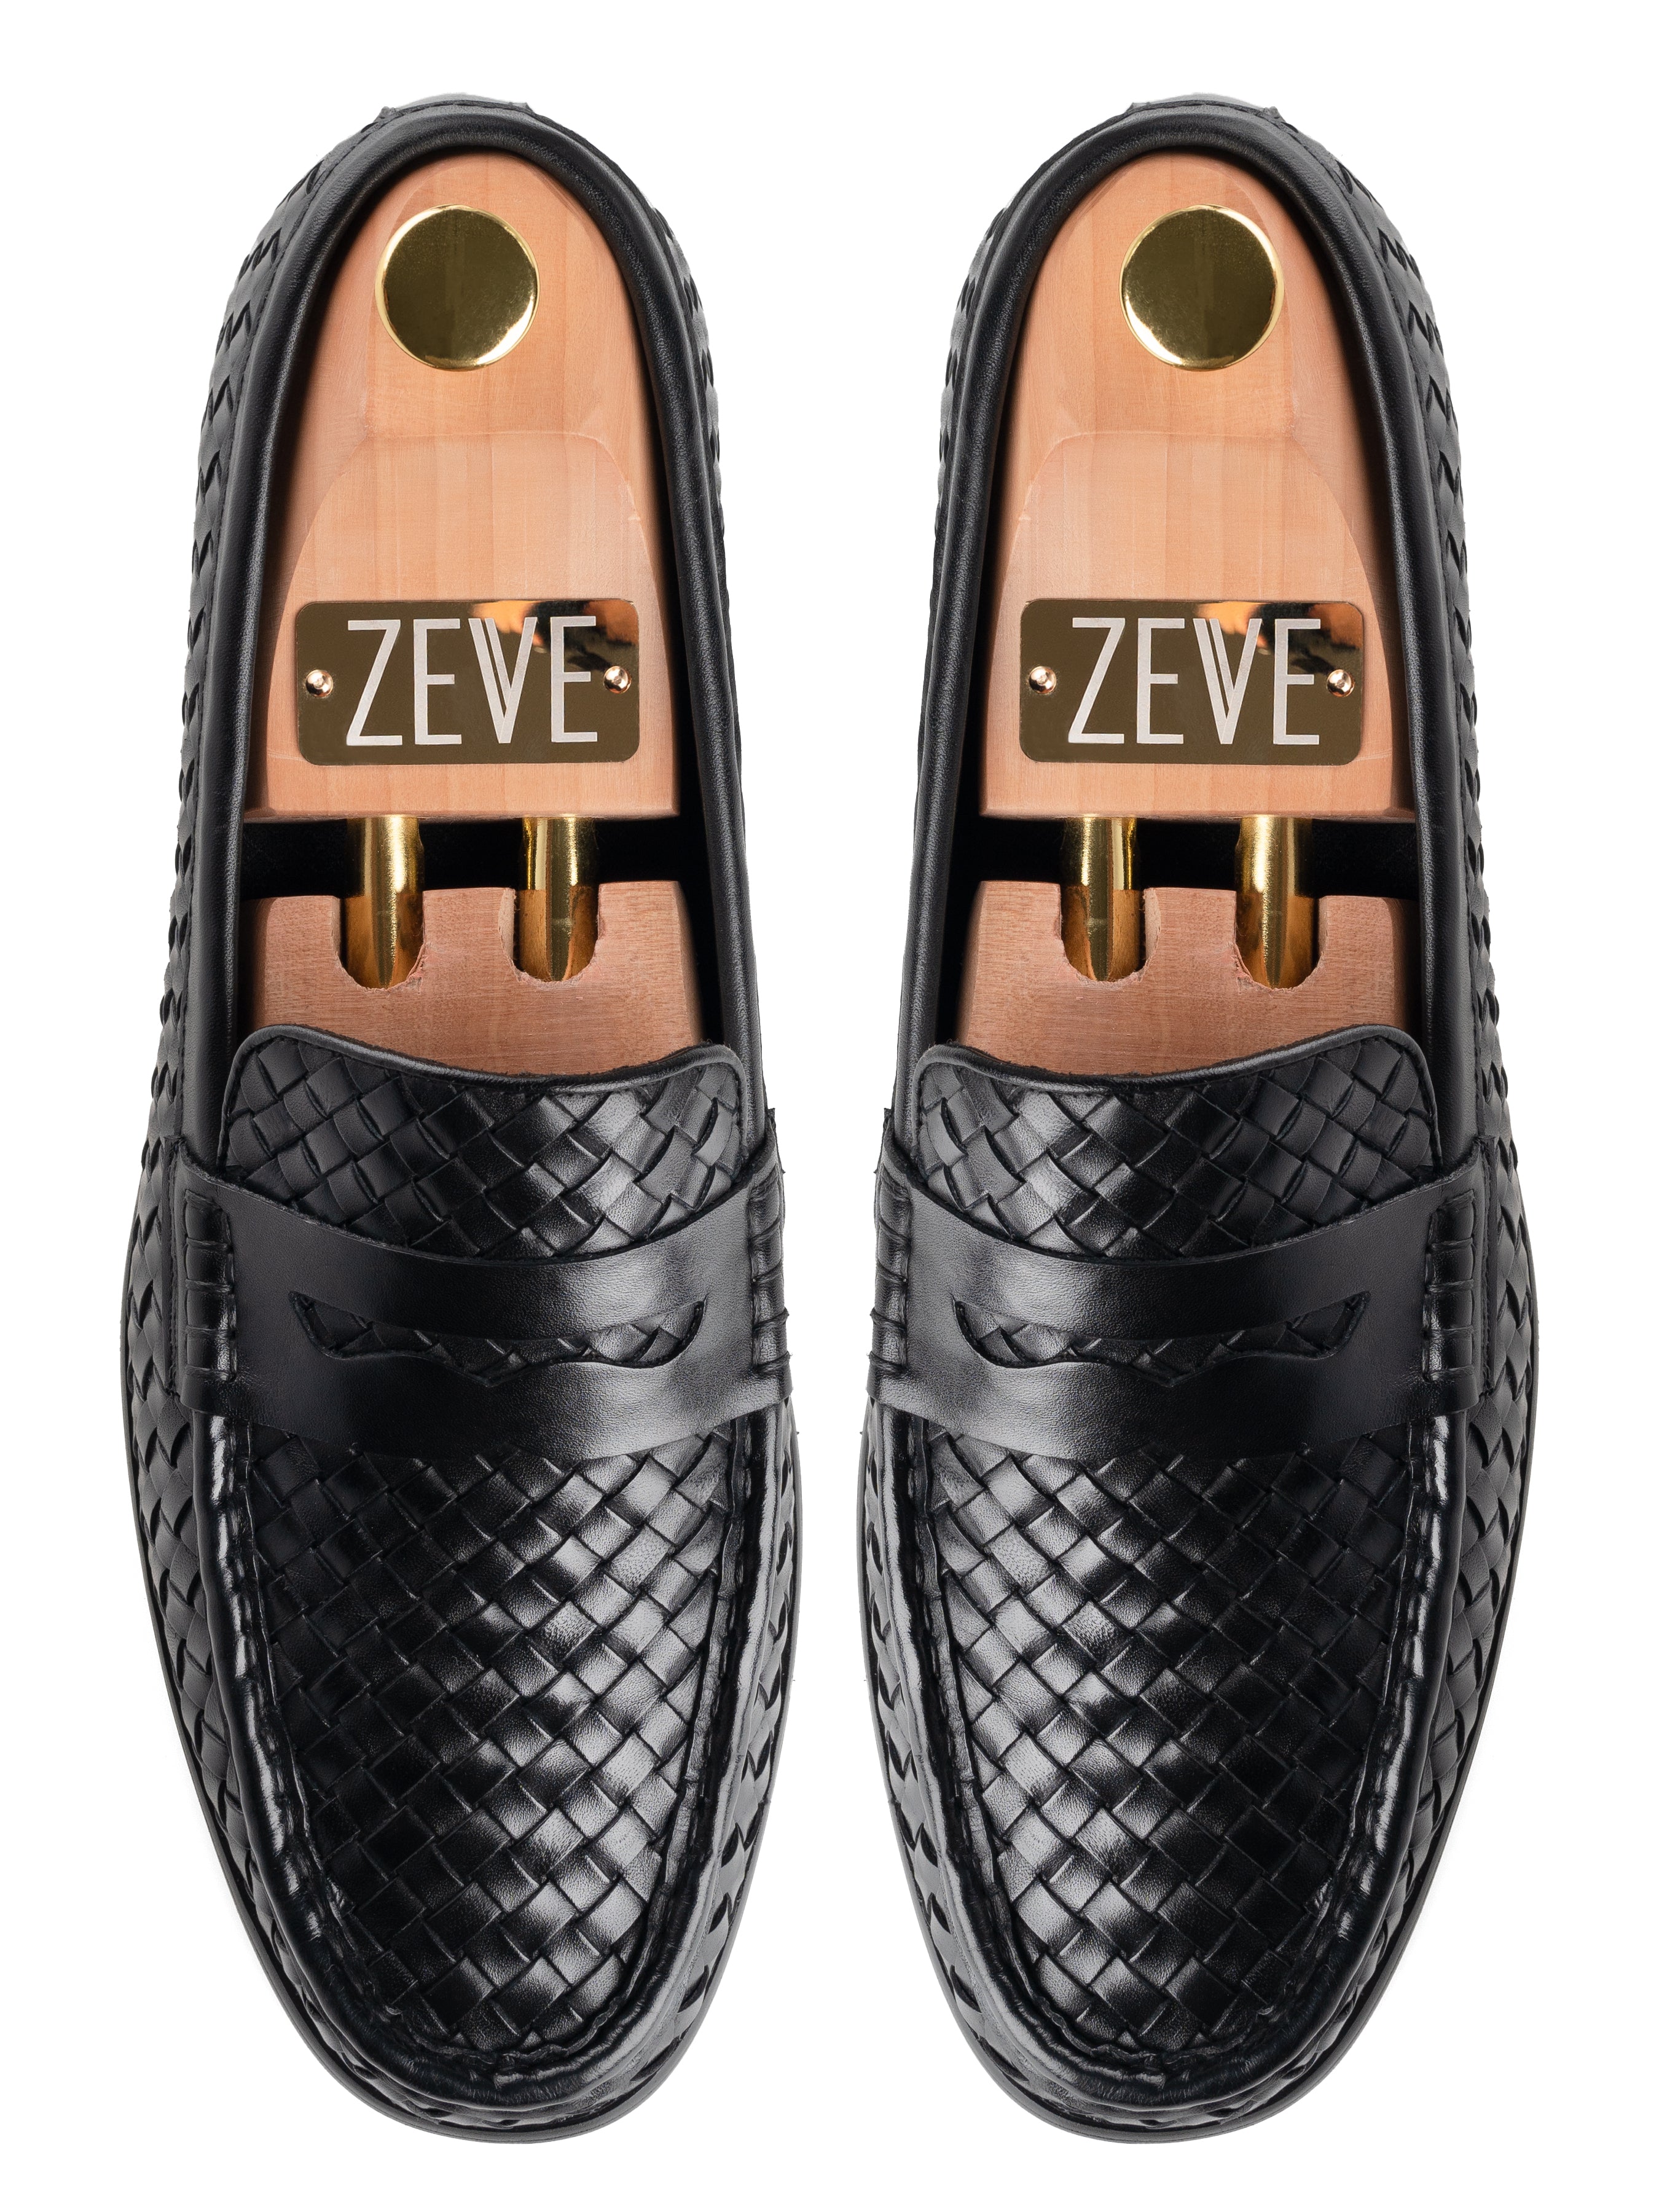 Marco Penny Loafer - Black Woven Leather | Zeve Shoes